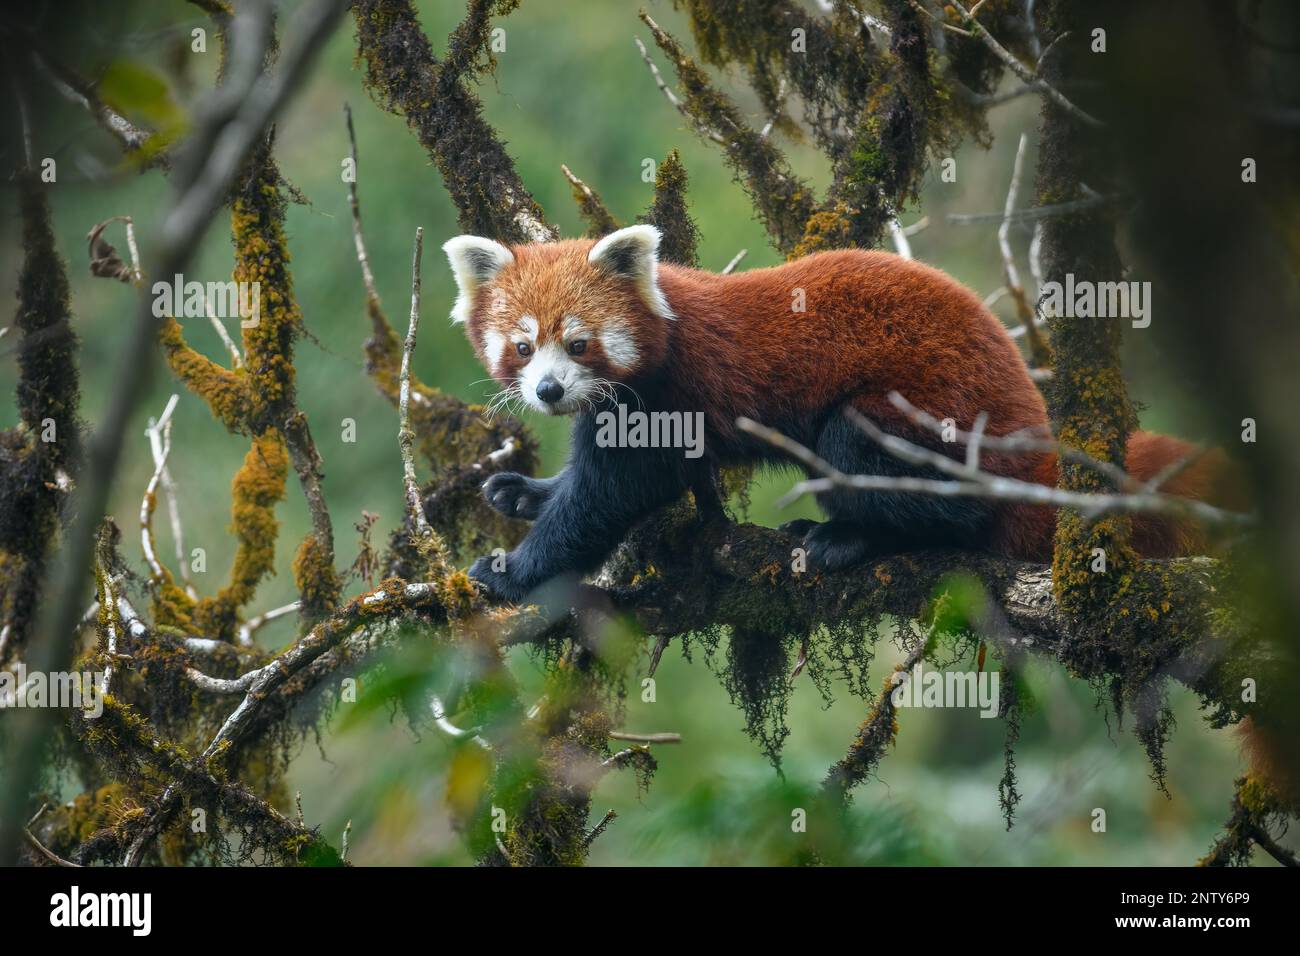 Full body portrait image of a red panda female sitting in a mossy oak nut tree showing the brilliant orange colouration in natural habitat Stock Photo